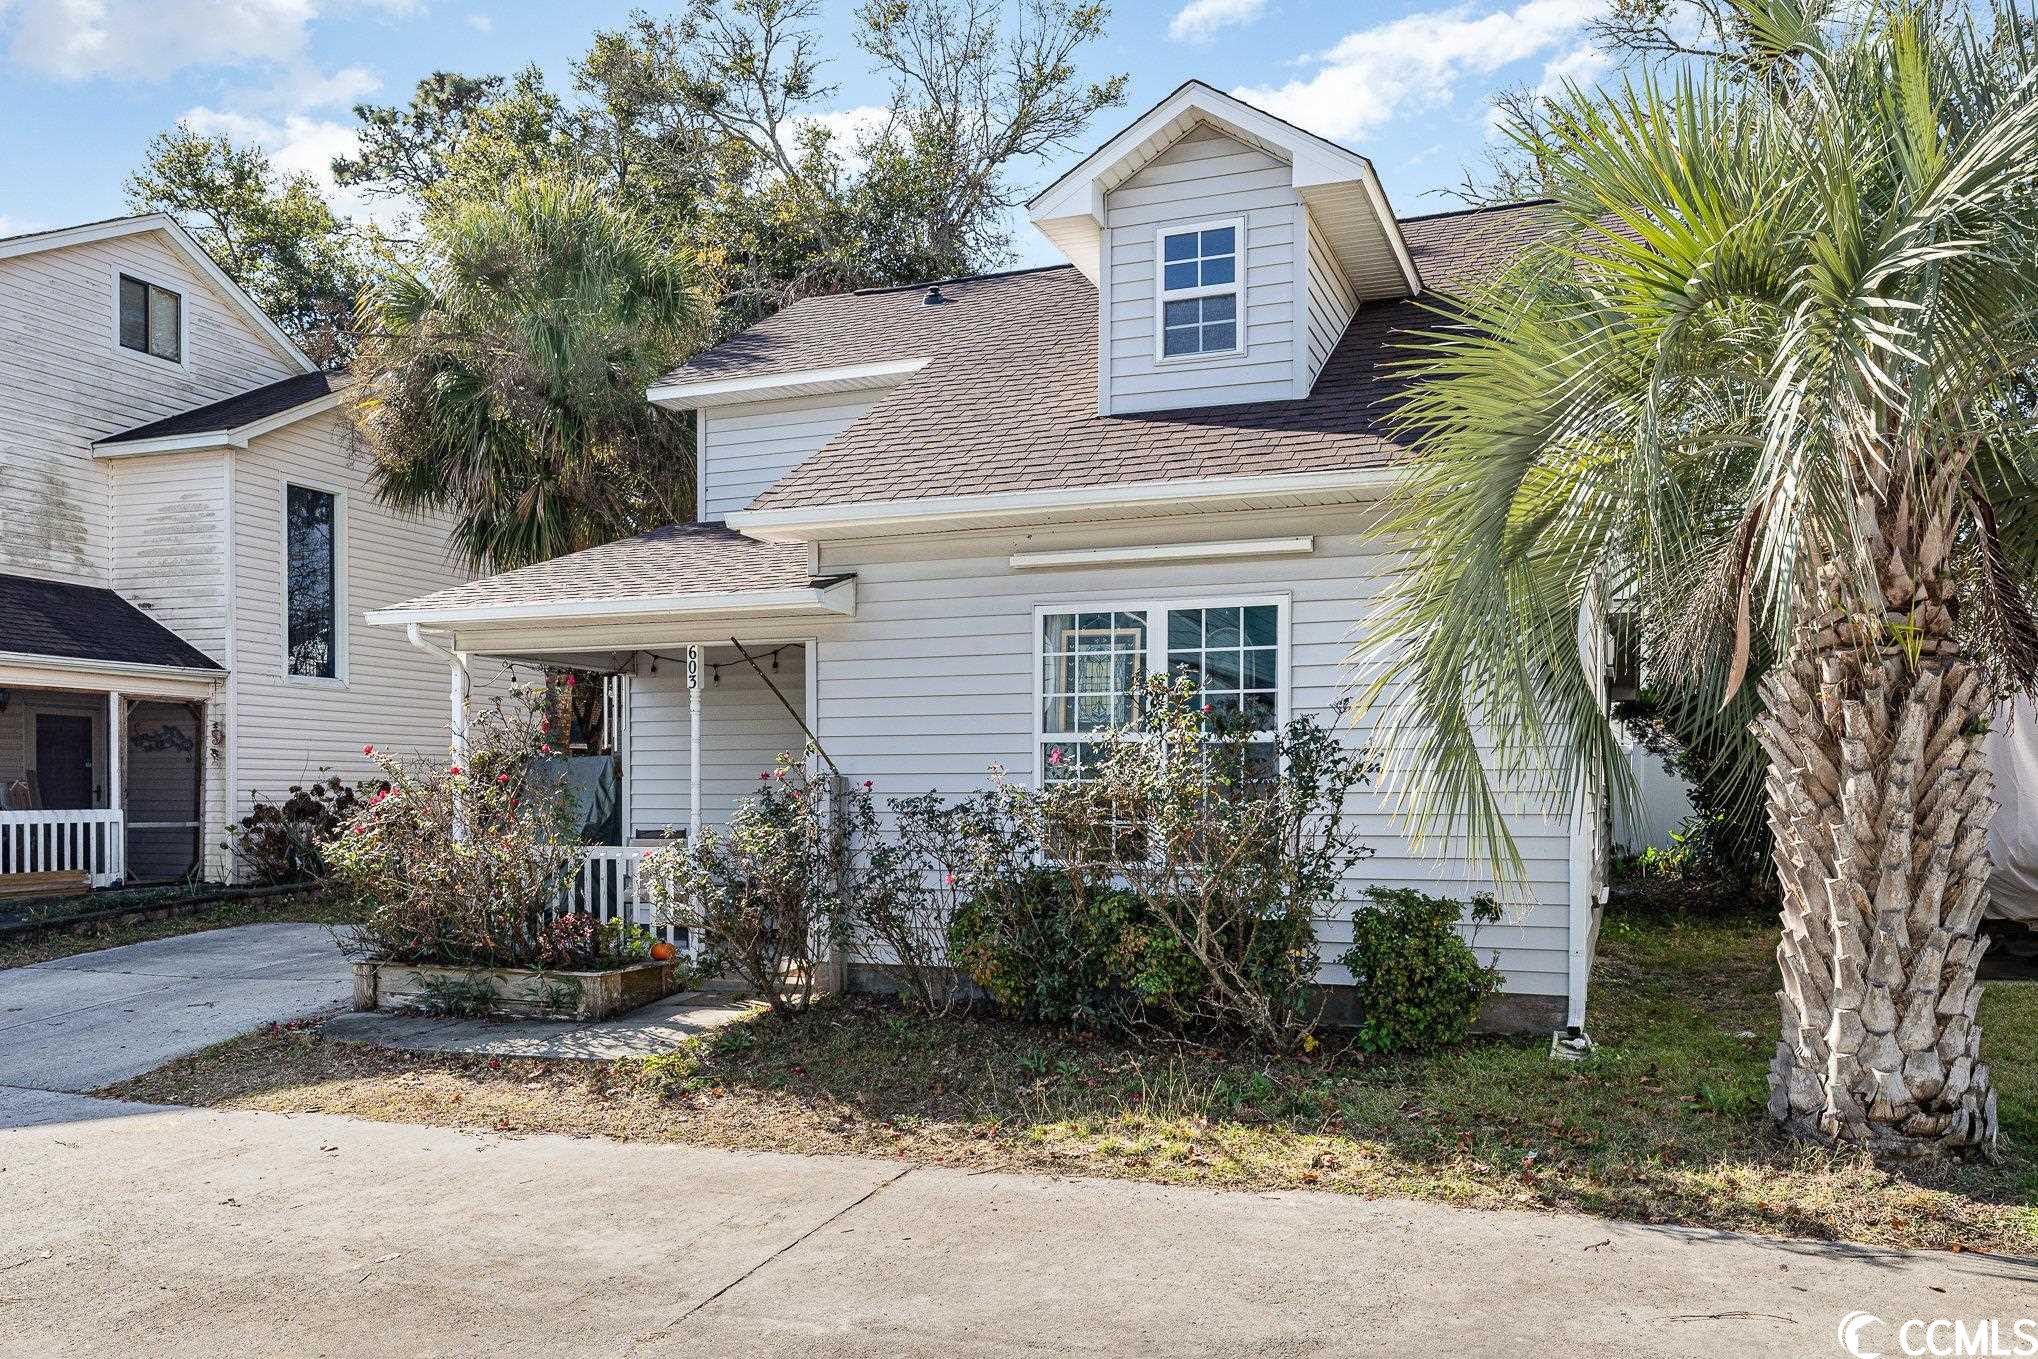 this beautiful 3 bedroom/2 bath home is perfectly situated in a prime location, just 2 blocks away from the beach. one of the standout features of the home is that it does not have an hoa (home owners association), giving you more freedom and flexibility.   the layout of the house is designed for convenience, with the master bedroom located on the first floor. this makes it easy and accessible for everyday living.   as you step into the living room and kitchen area, you'll be greeted by stunning bamboo flooring, adding a touch of elegance to the space. the kitchen is equipped with 42-inch cabinets that have soft-closing features, and the drawers also have full extension and soft-closing capabilities, ensuring smooth operation. additionally, there is a custom-built cabinet/entrainment system adding a stylish and functional element.     upstairs, you'll find a screened-in balcony that offers a peaceful retreat. this balcony is shared between the two bedrooms, creating a "jack and jill" setup. it's a perfect spot to relax and enjoy the fresh air.   recent updates have been made to the home to ensure its quality and efficiency including a new refrigerator. in 2022, a new hvac system was installed. in 2021, the roof was replaced. additionally, in 2019, a new hot water heater was installed. the downstairs living areas have been freshly painted. the shed on the back of the property is included in the purchase for additional storage.  the following furniture conveys: living room (sofa, loveseat, and entertainment cabinets); downstairs bedroom (bed frame and desk); upstairs bedroom on the right (bedframe and desk).  overall, this home offers a fantastic combination of location, features, and updates, making it a truly desirable property. don't miss out on the opportunity to make it yours!  while the information provided is considered reliable. it is important for the buyer to independently verify all details and conduct their own due diligence. the buyer holds the sole responsibility for verifying any and all information.